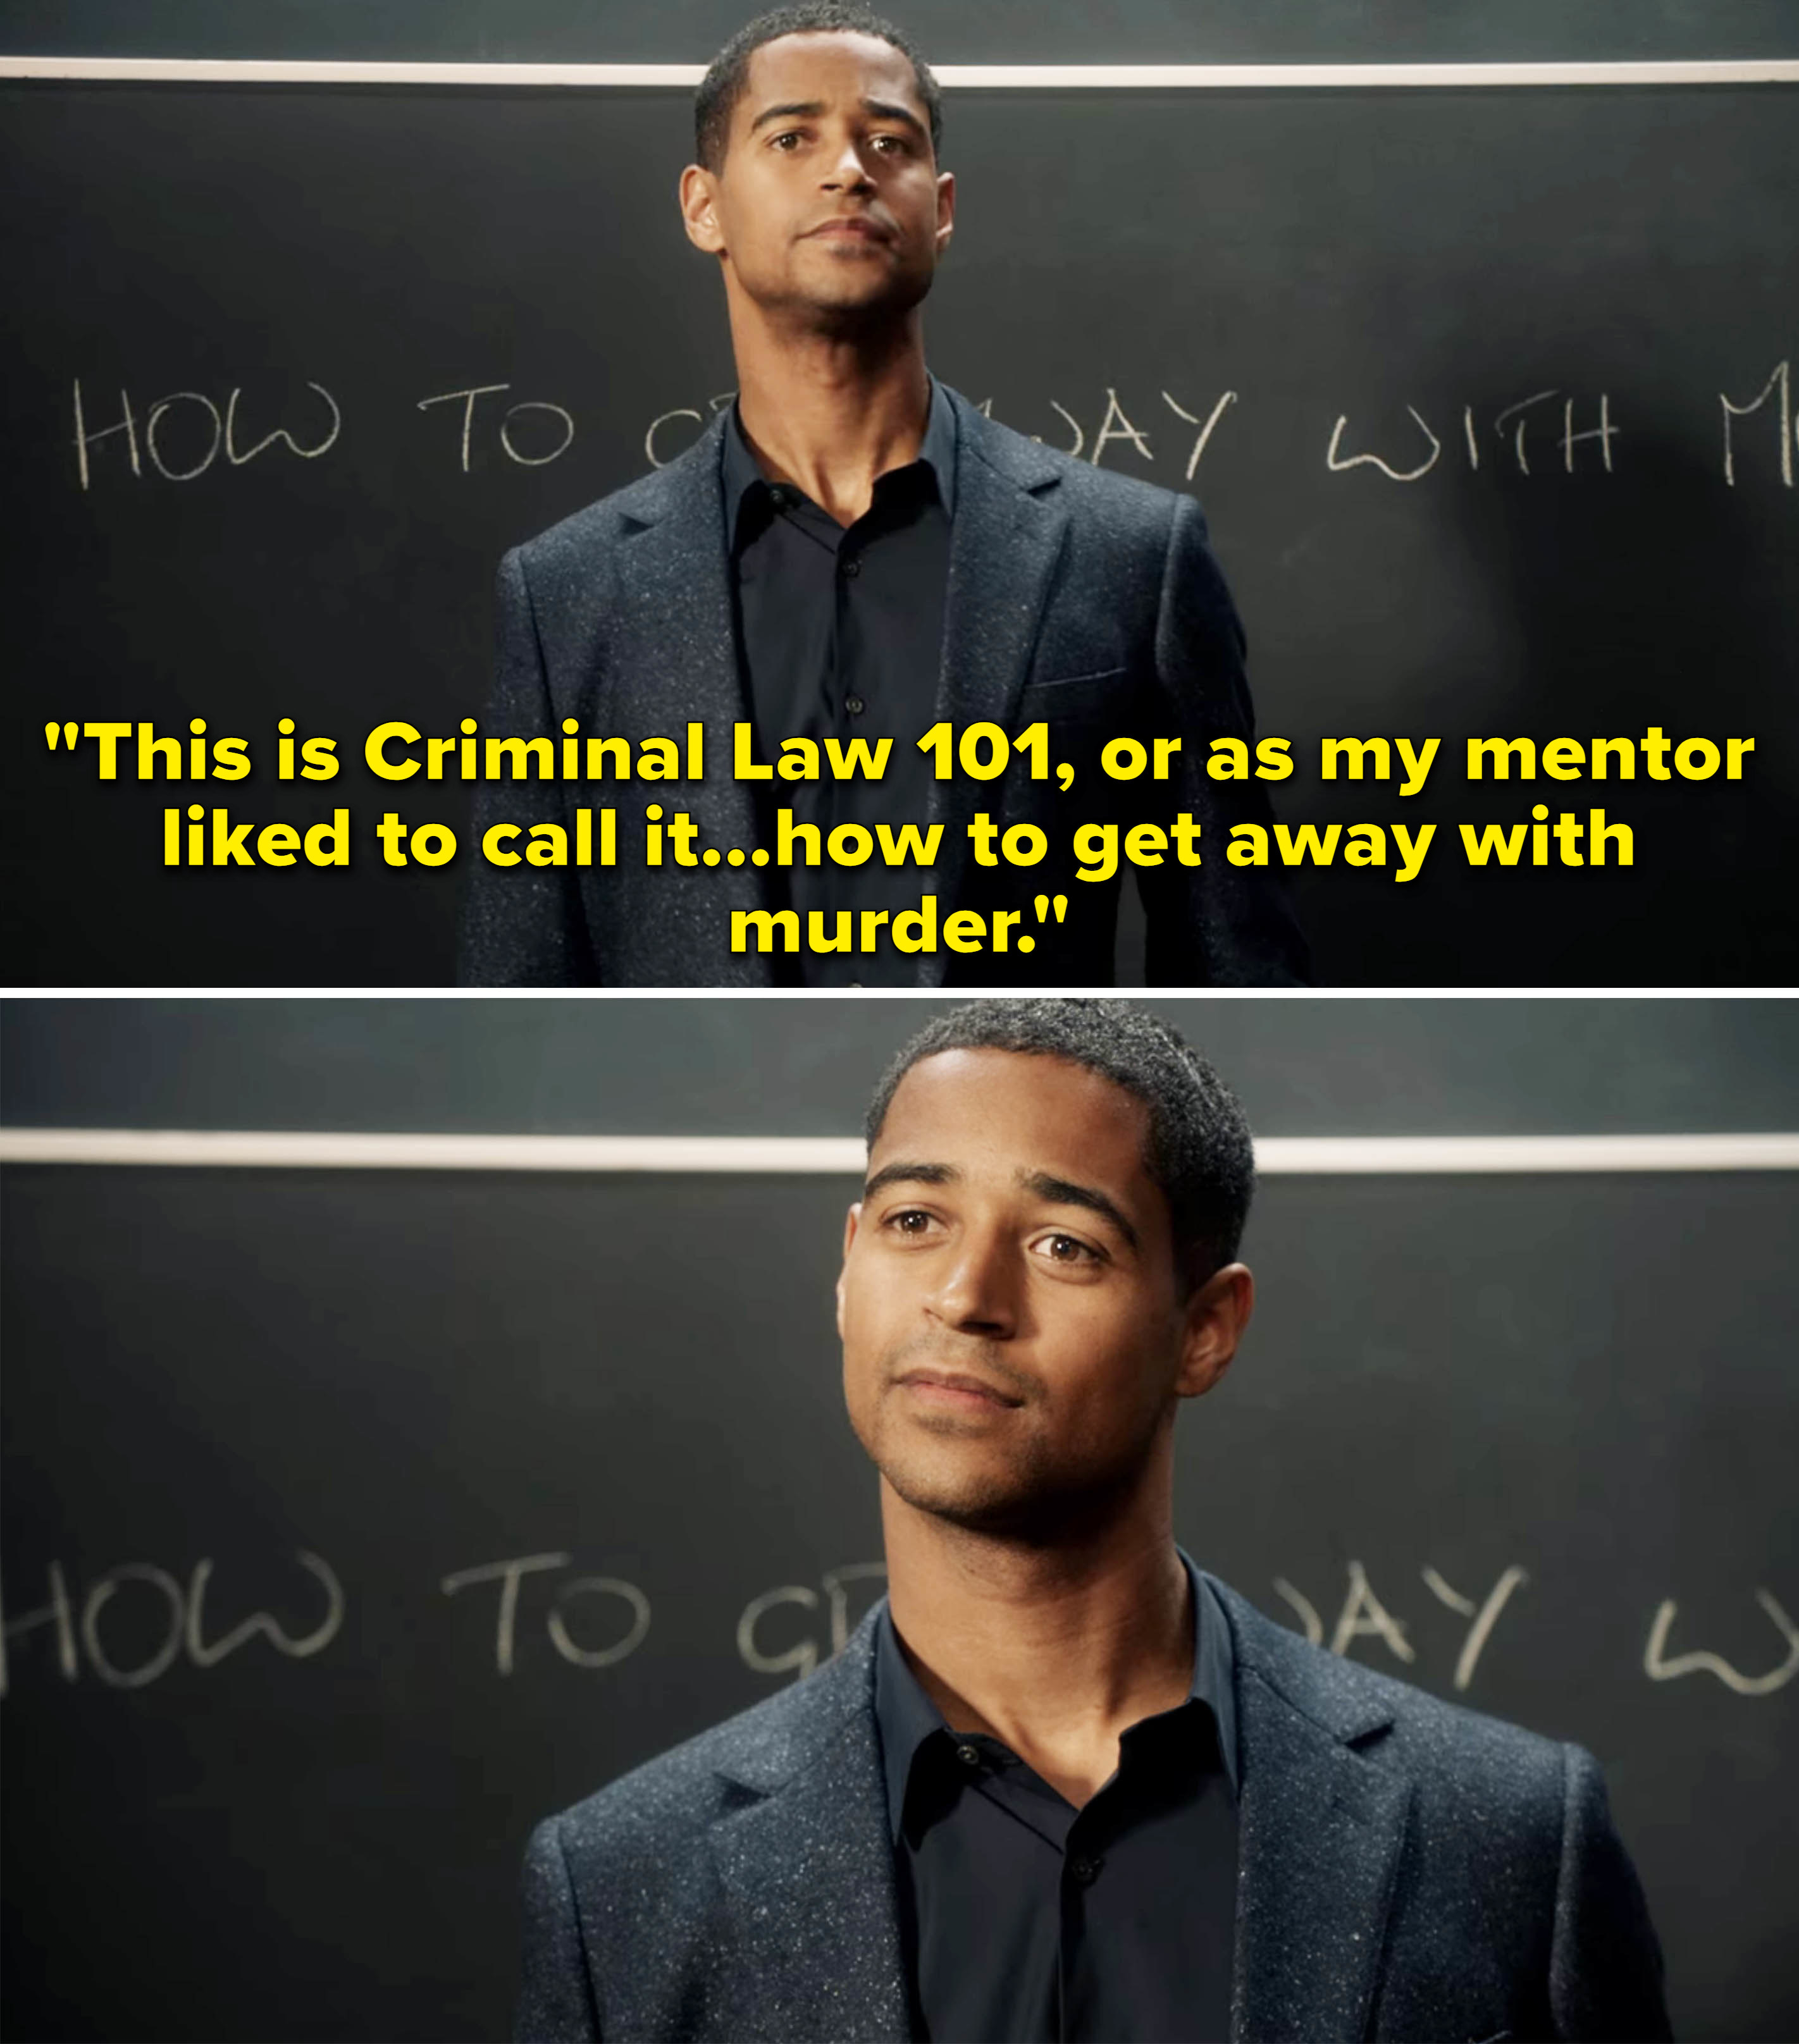 Christopher saying, &quot;This is Criminal Law 101, or as my mentor liked to call it, how to get away with murder&quot;